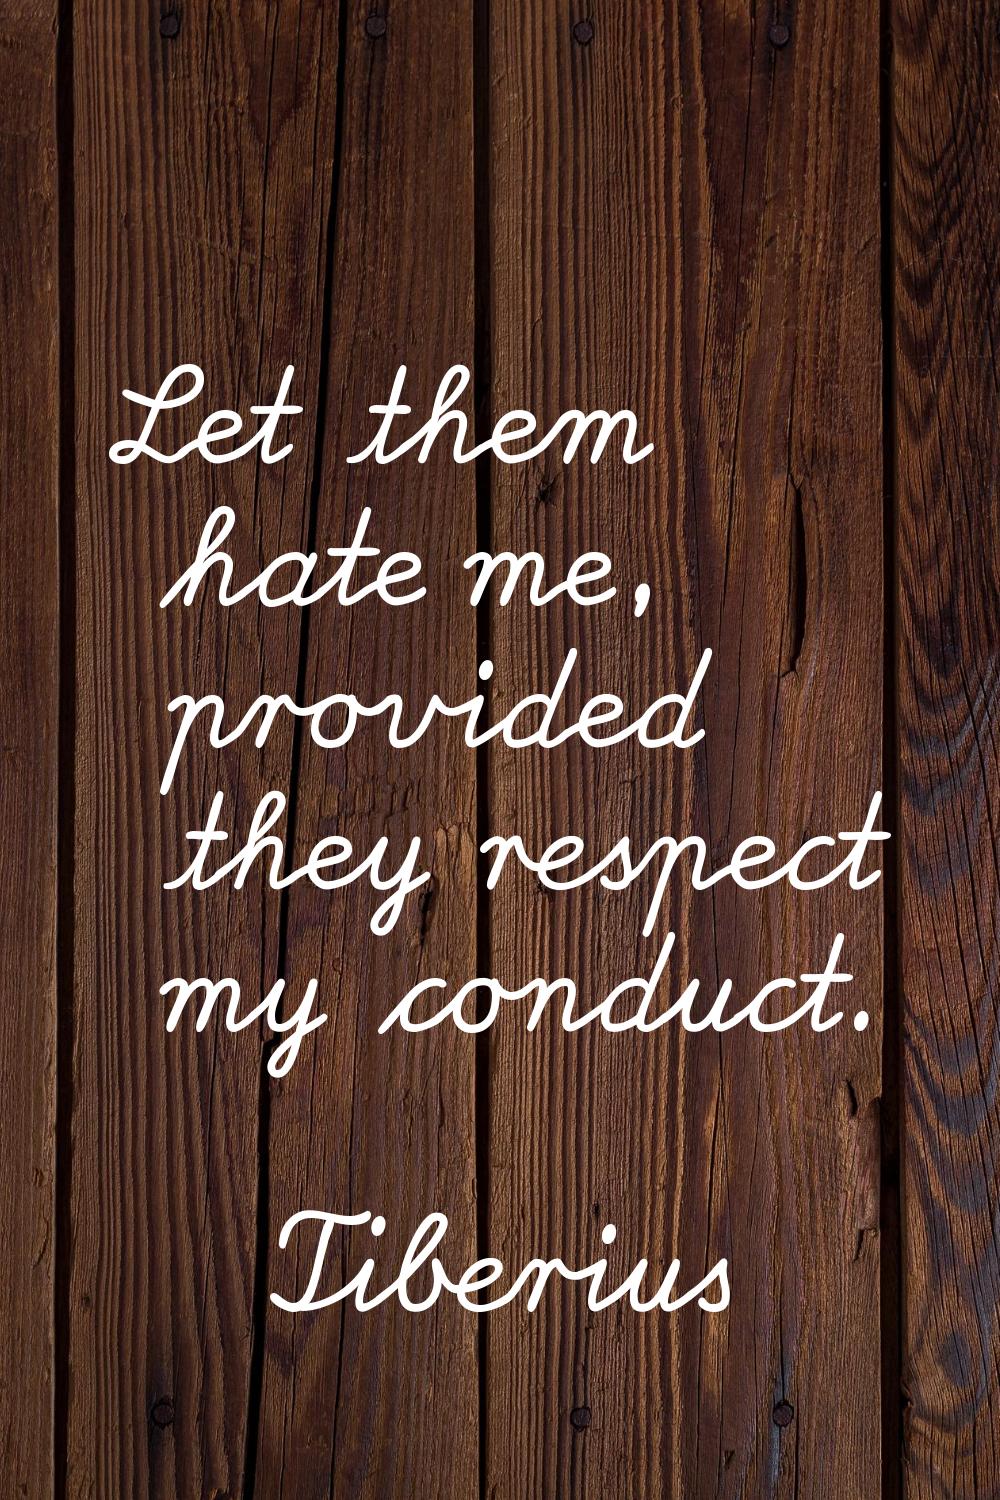 Let them hate me, provided they respect my conduct.